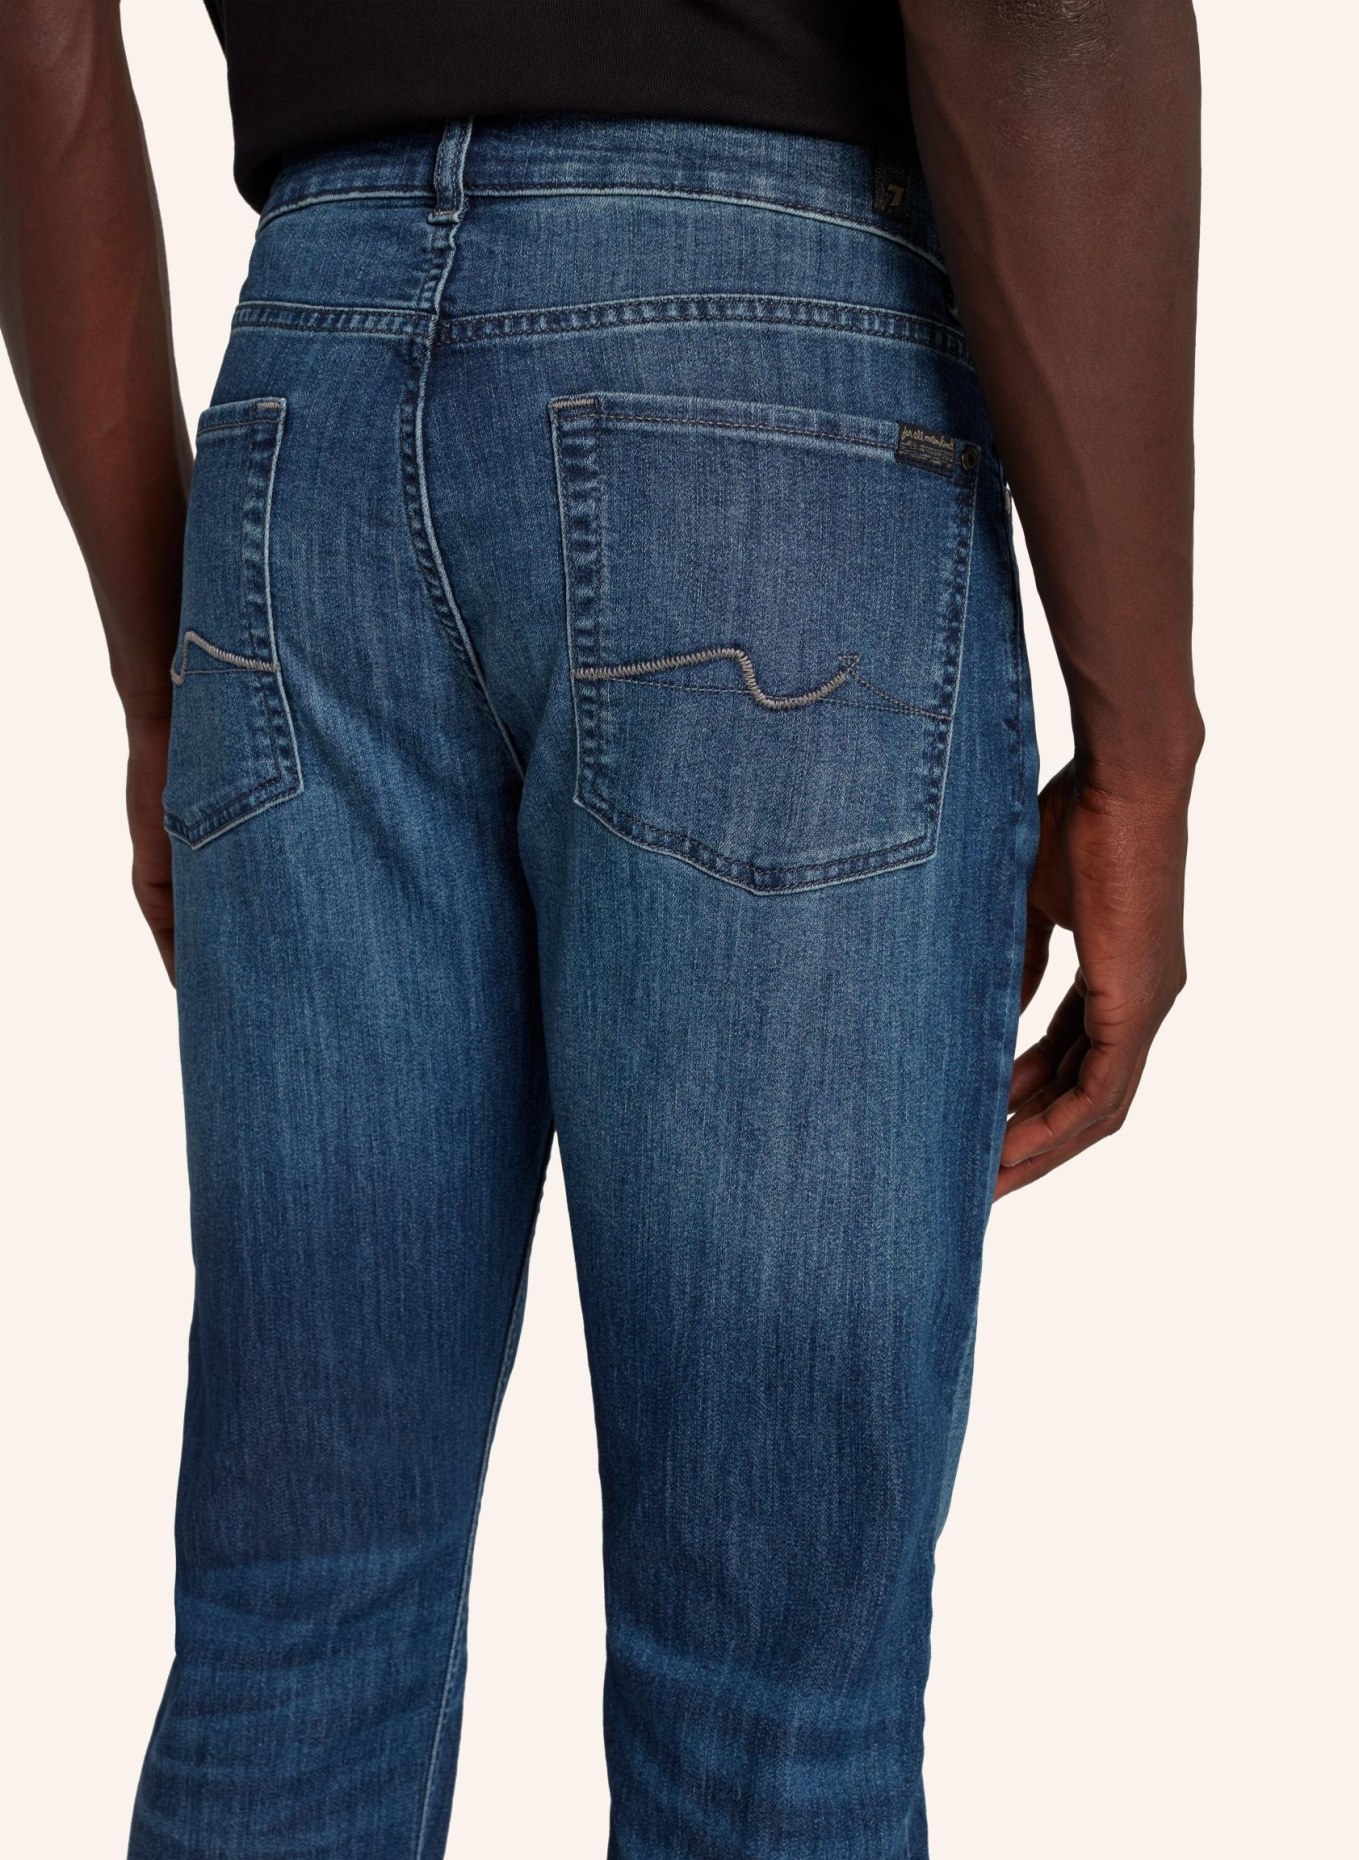 7 for all mankind Jeans Slim Fit  (Bild 6)